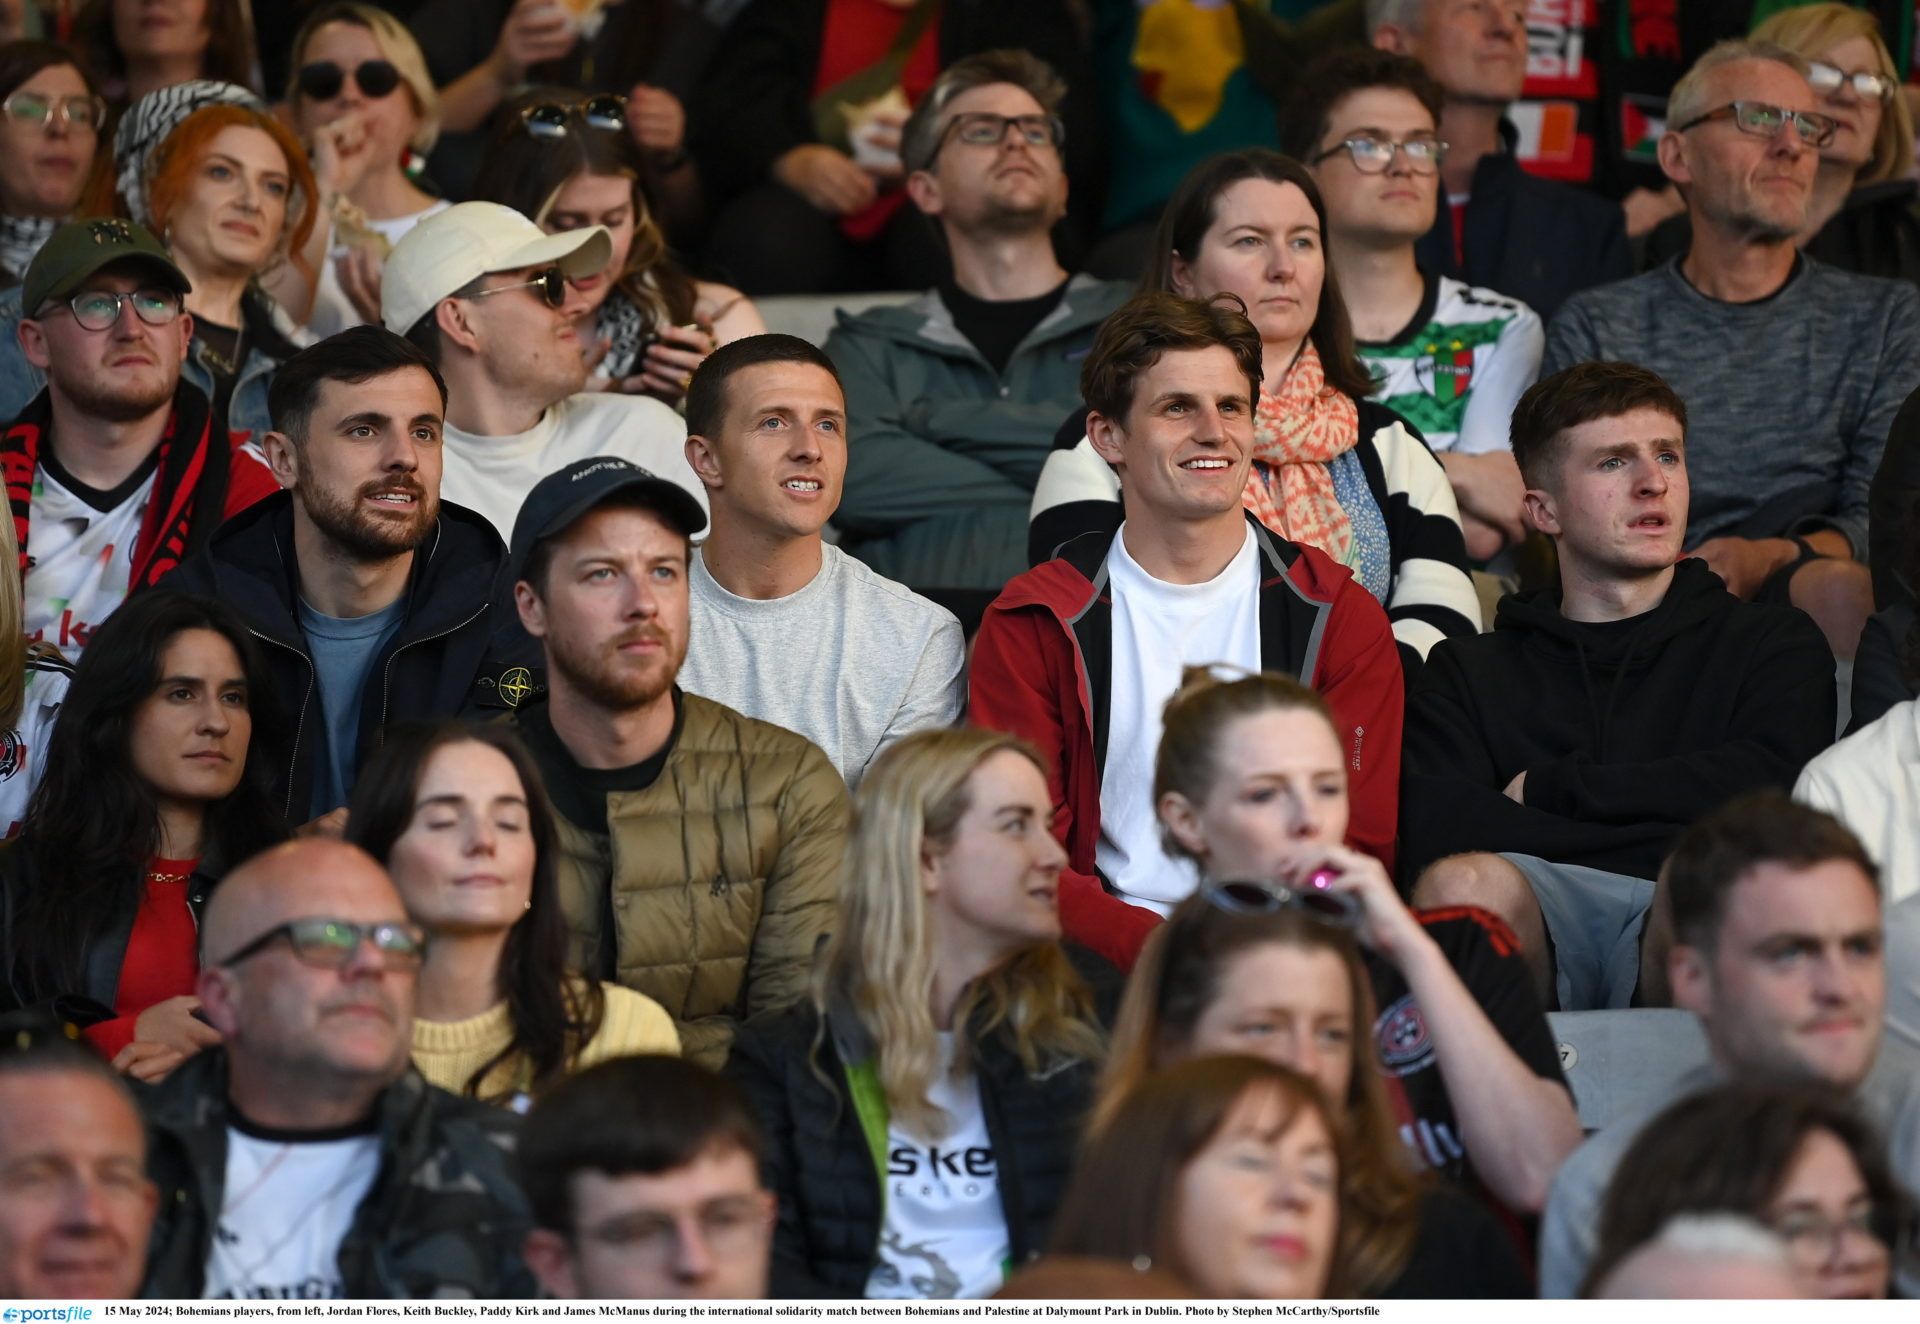 15 May 2024; Bohemians players, from left, Jordan Flores, Keith Buckley, Paddy Kirk and James McManus during the international solidarity match between Bohemians and Palestine at Dalymount Park in Dublin. Photo by Stephen McCarthy/Sportsfile